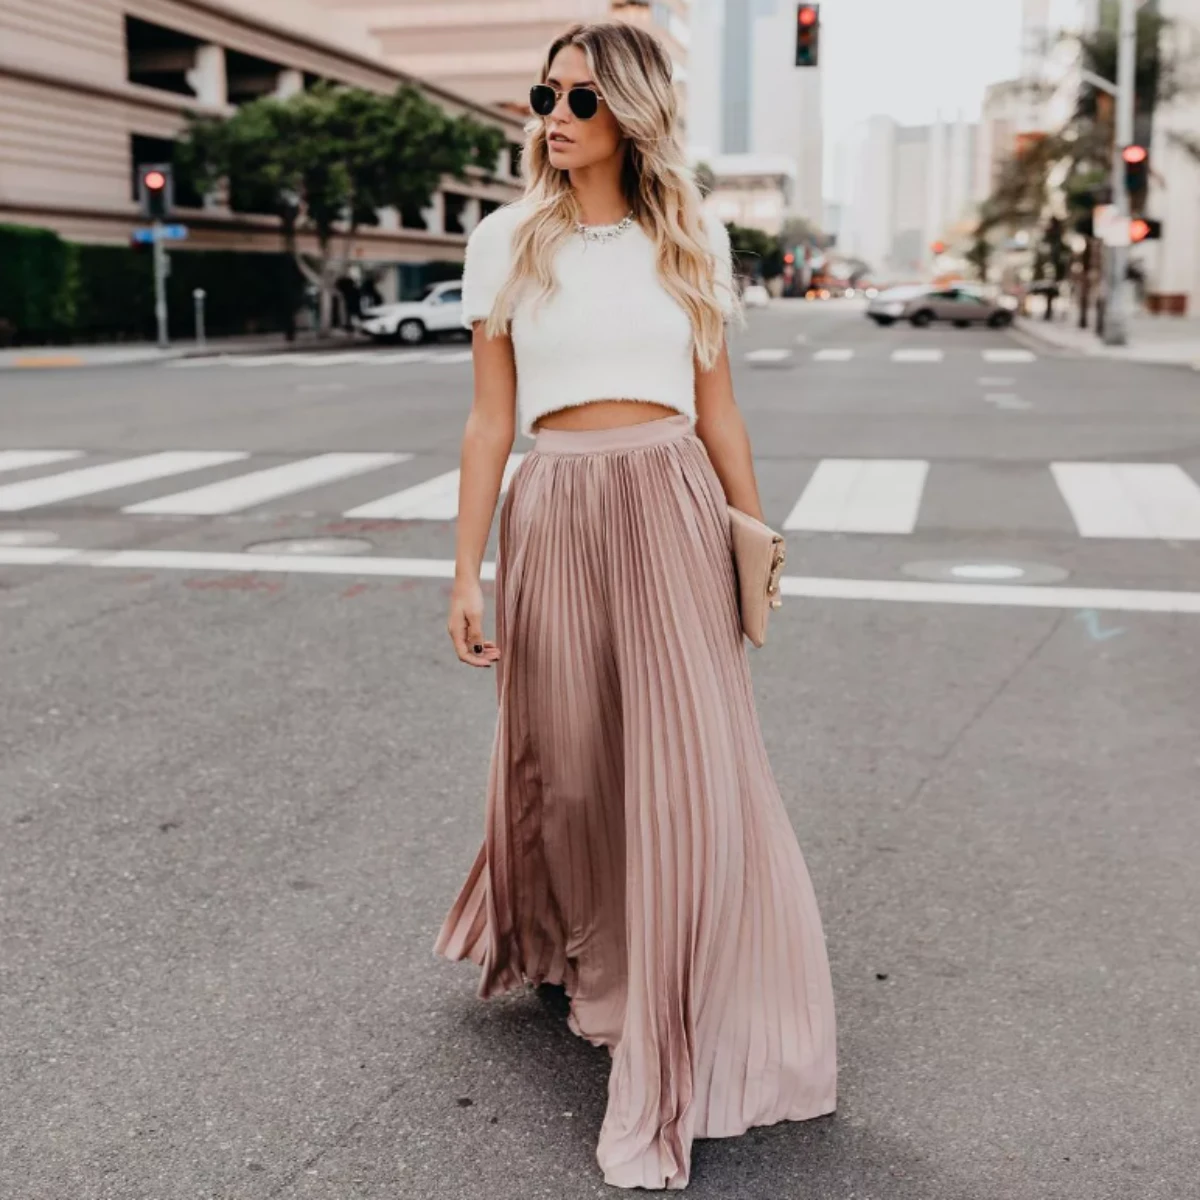 1698568840 756 How to wear a long skirt to have a wasp.webp - How to wear a long skirt to have a wasp waist this fall 2023?  Here are the stylists’ tips!